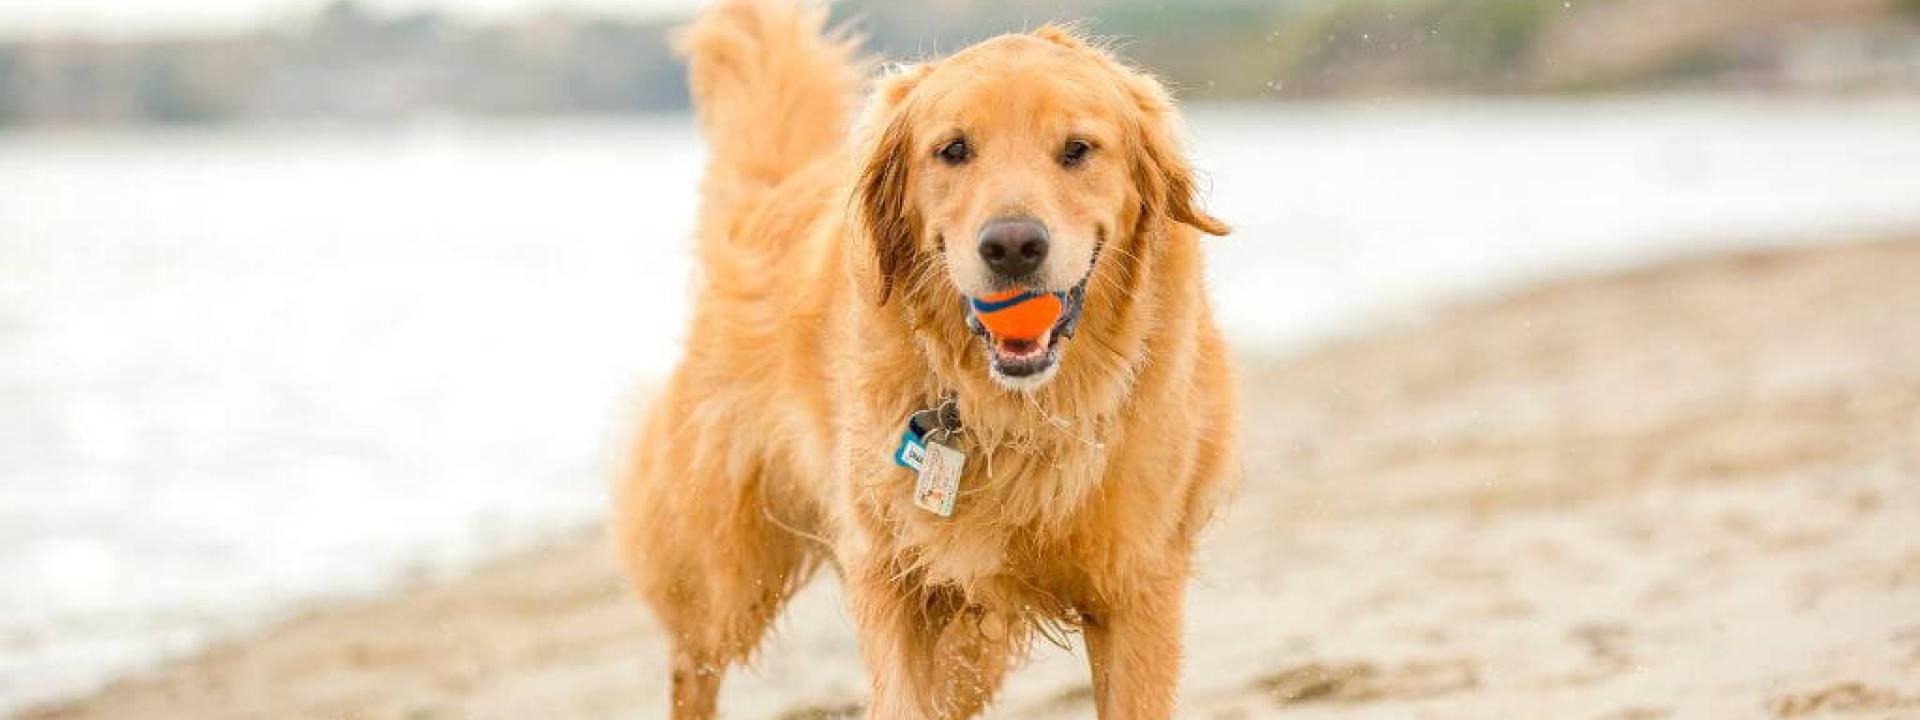 A wet and sandy dog playing at the beach. 